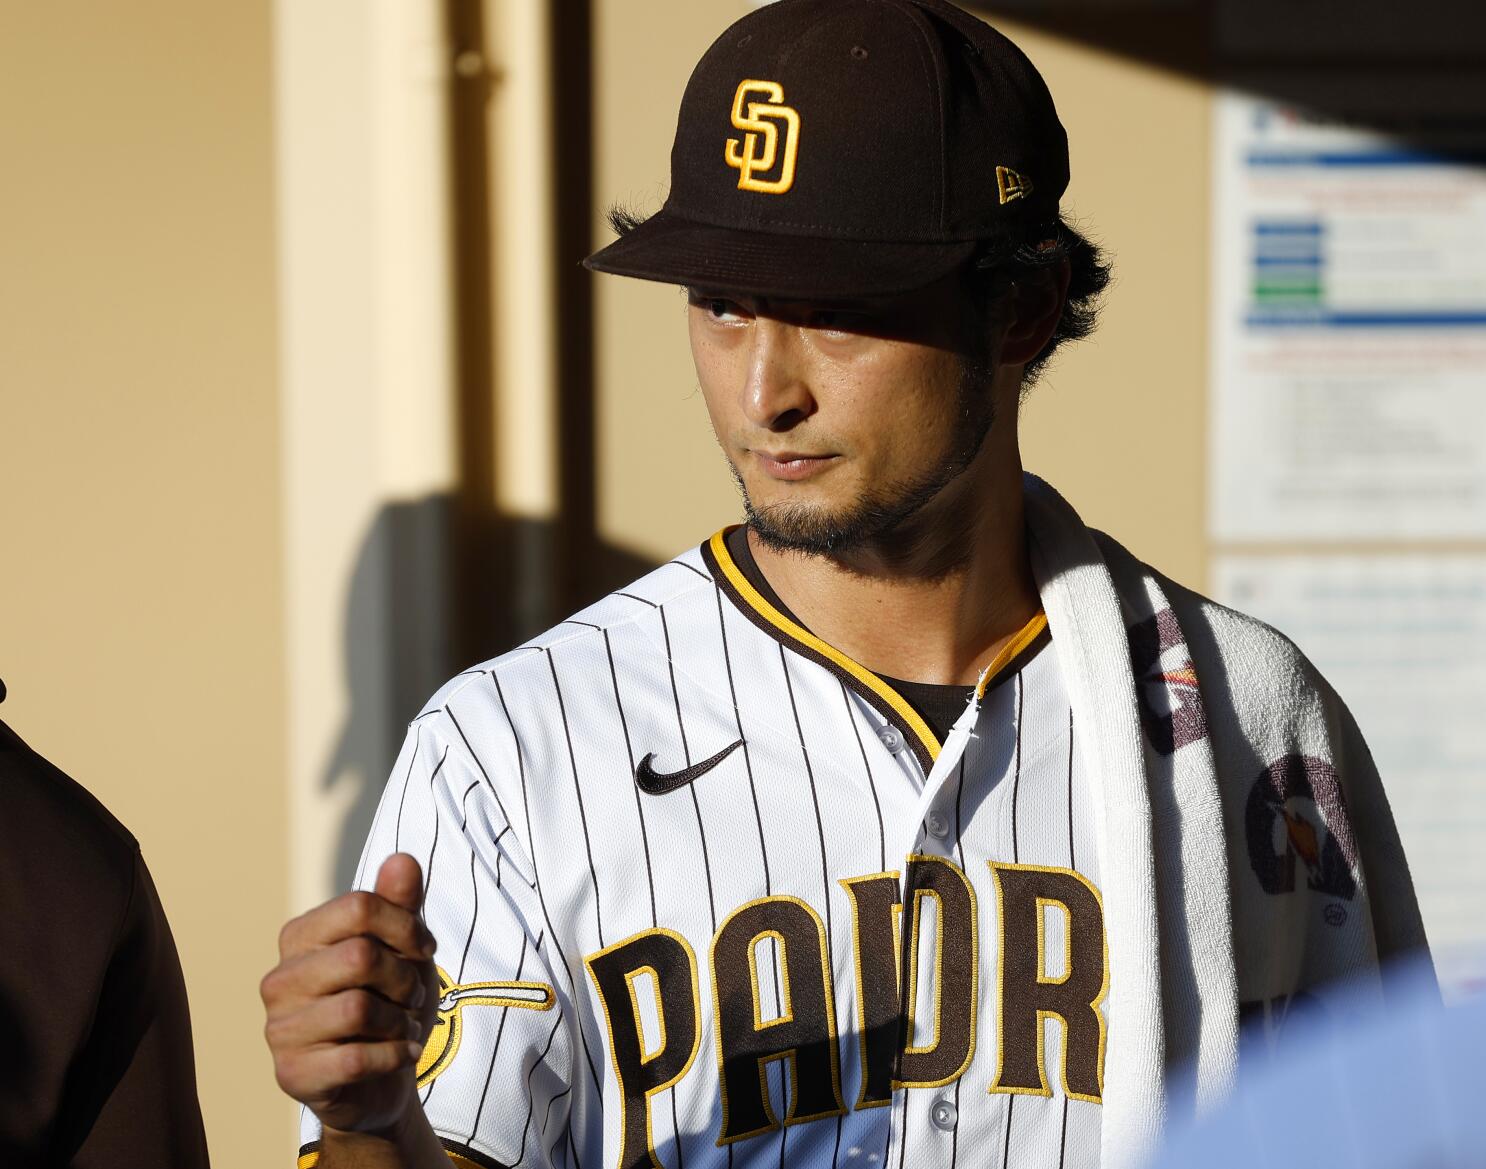 Padres are using their pitching depth in a proactive way to limit